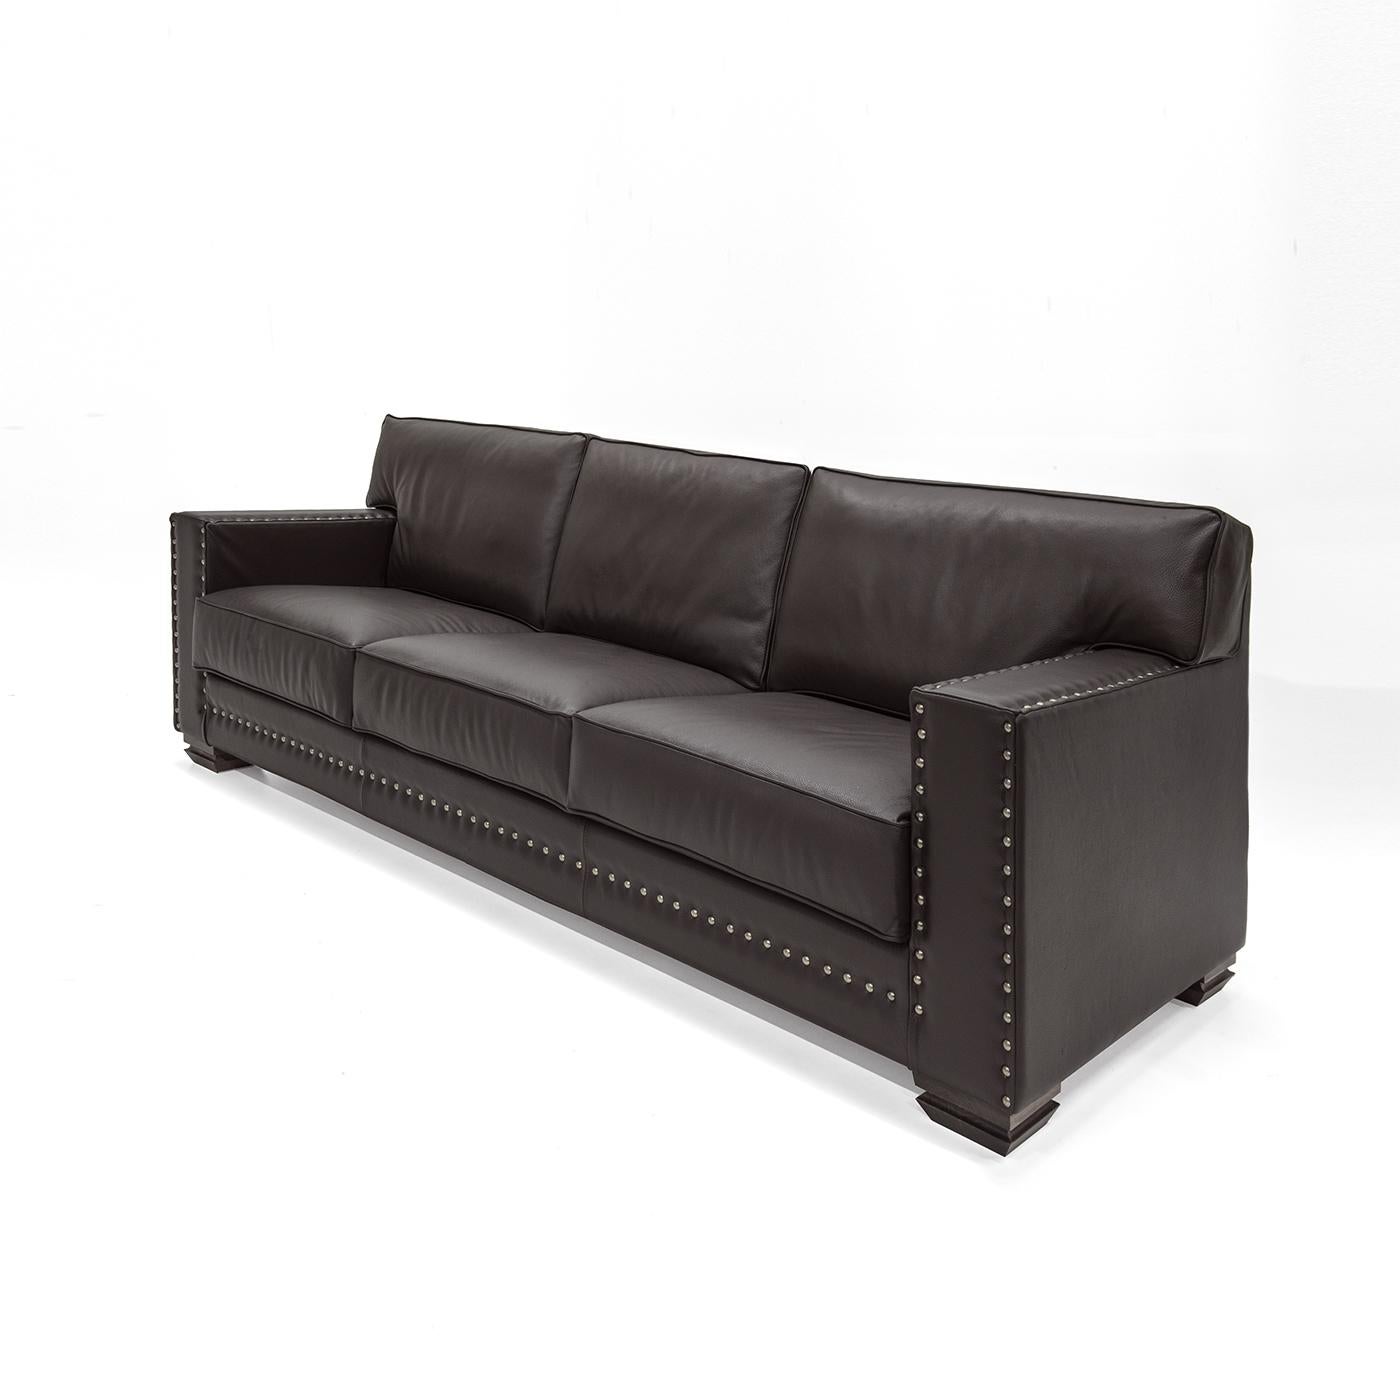 This exquisite and comfortable sofa was crafted entirely by hand and features a sturdy structure in multi-layer wood. Its soft seat features built in elastics providing suspension. The high quality upholstery is in leather and the pillows and seat